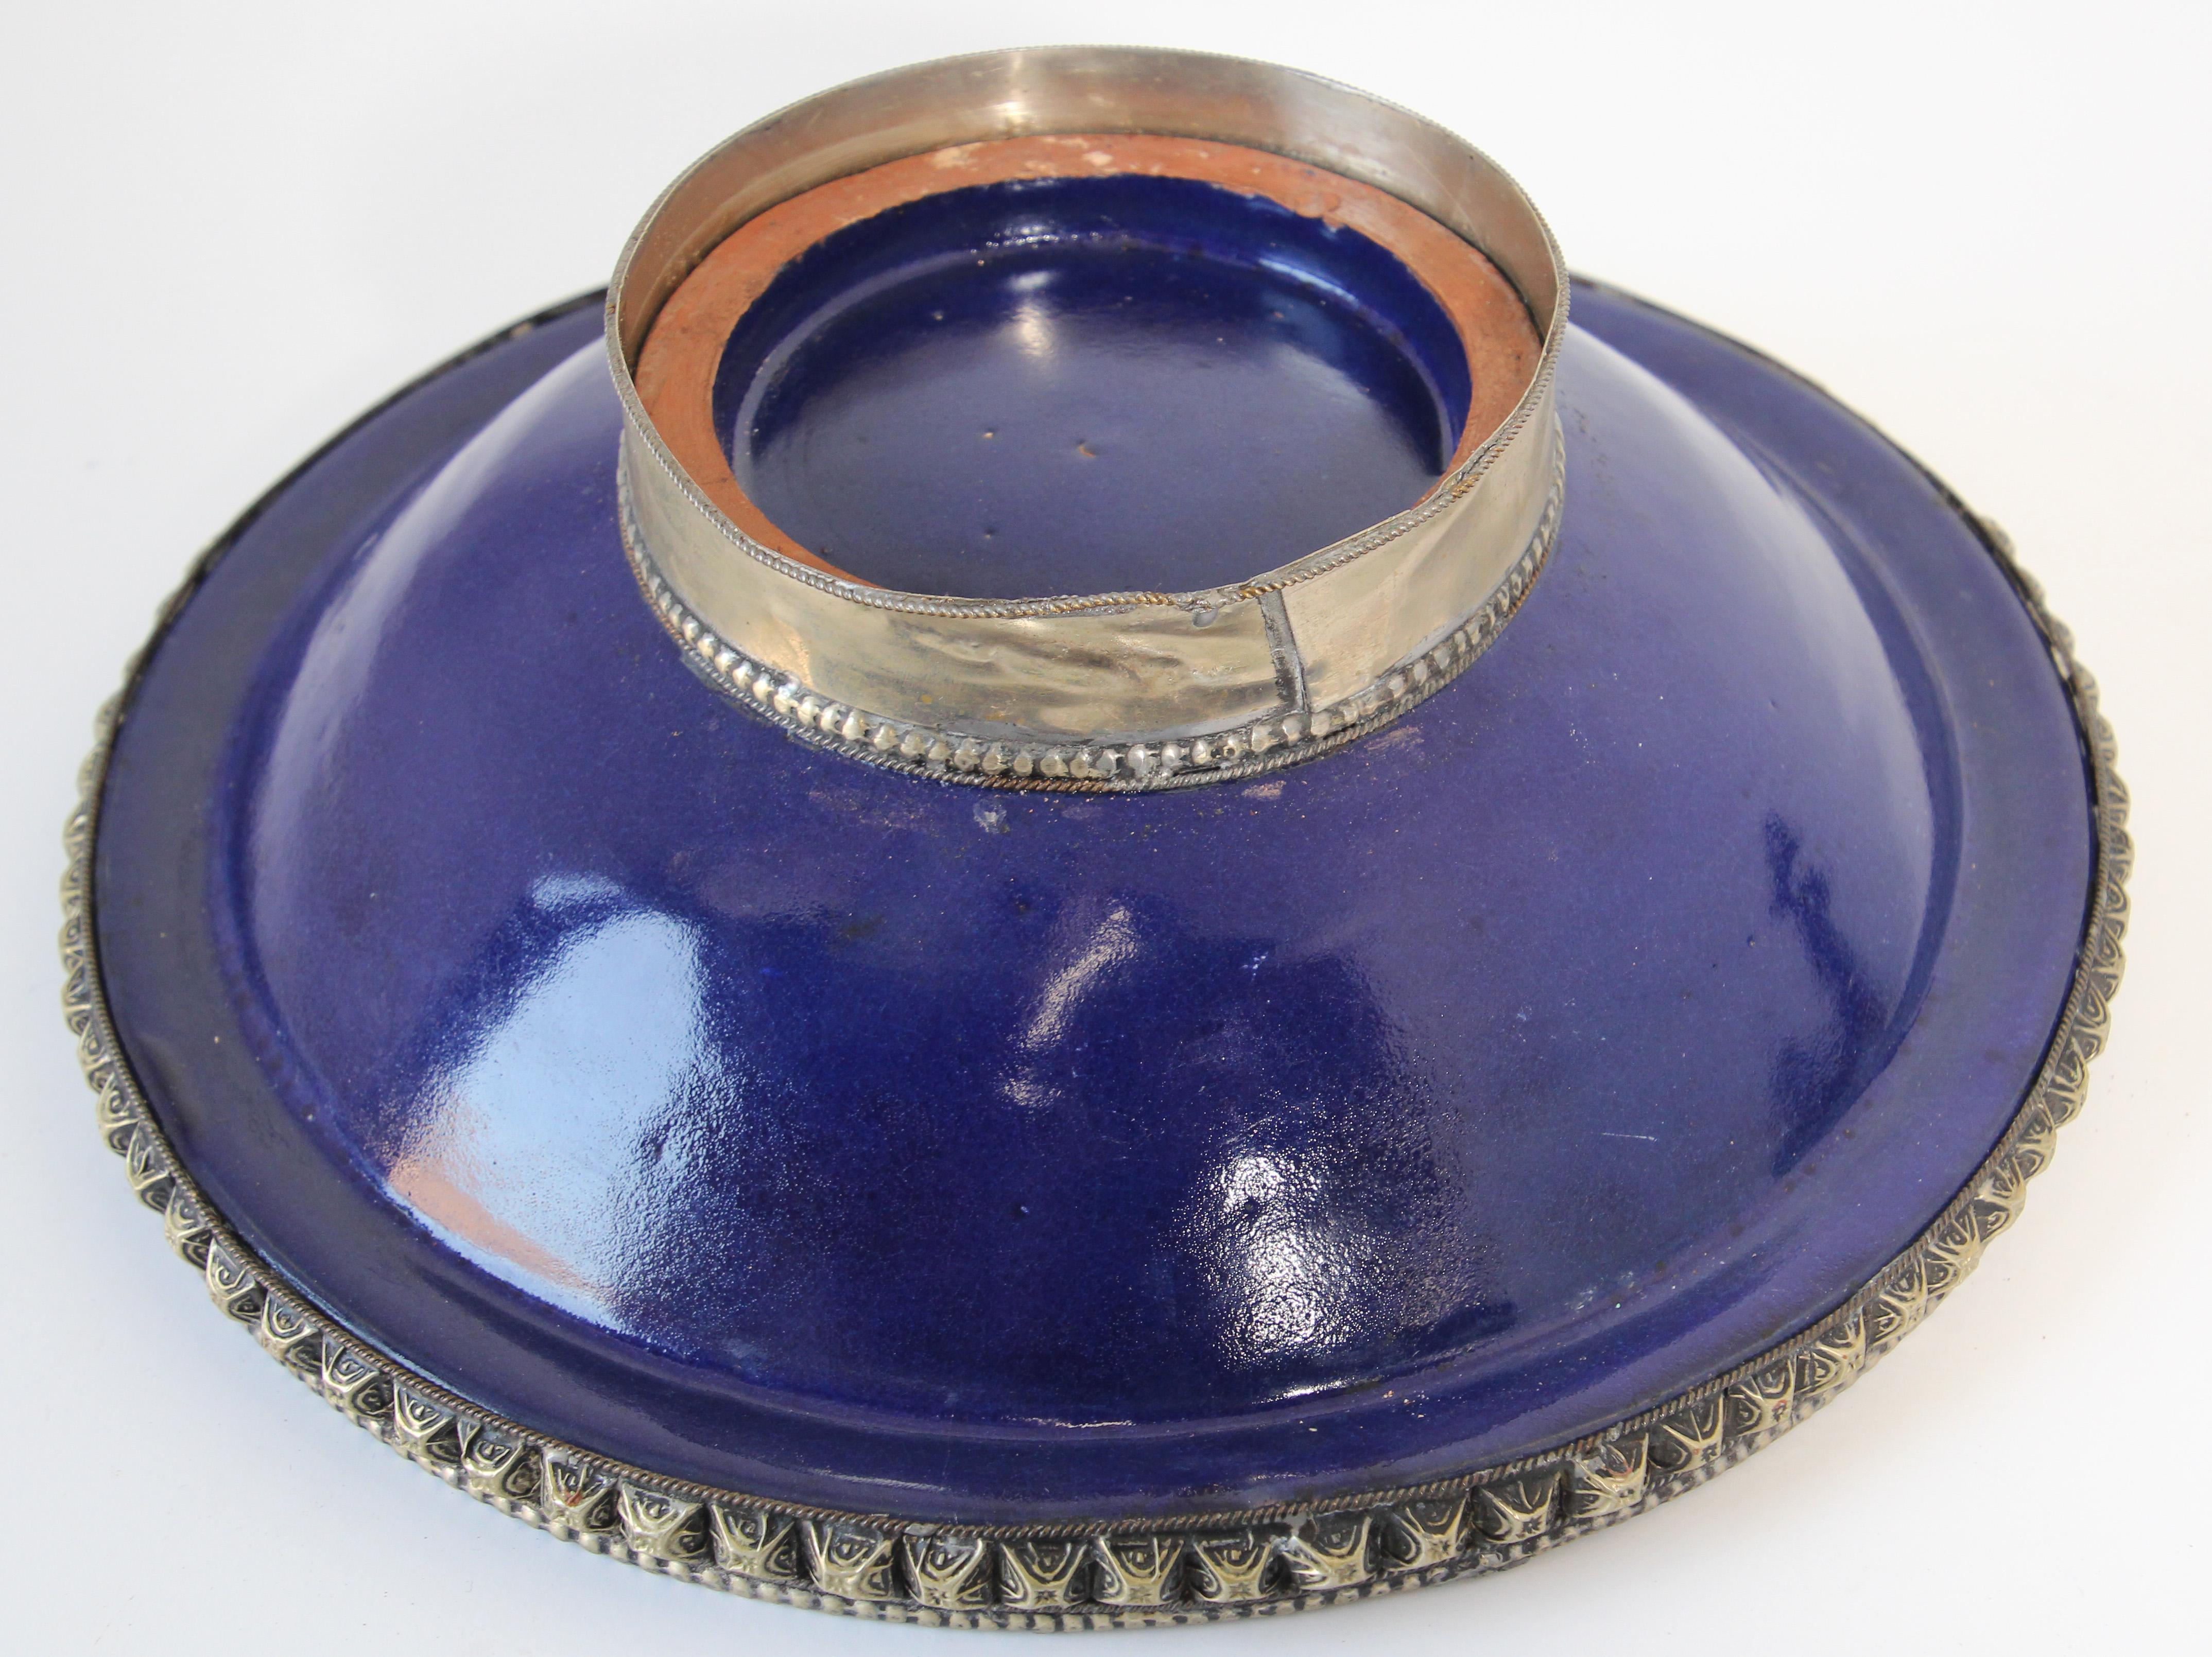 Cobalt Blue Moroccan Ceramic Bowl with Silver Overlay For Sale 2